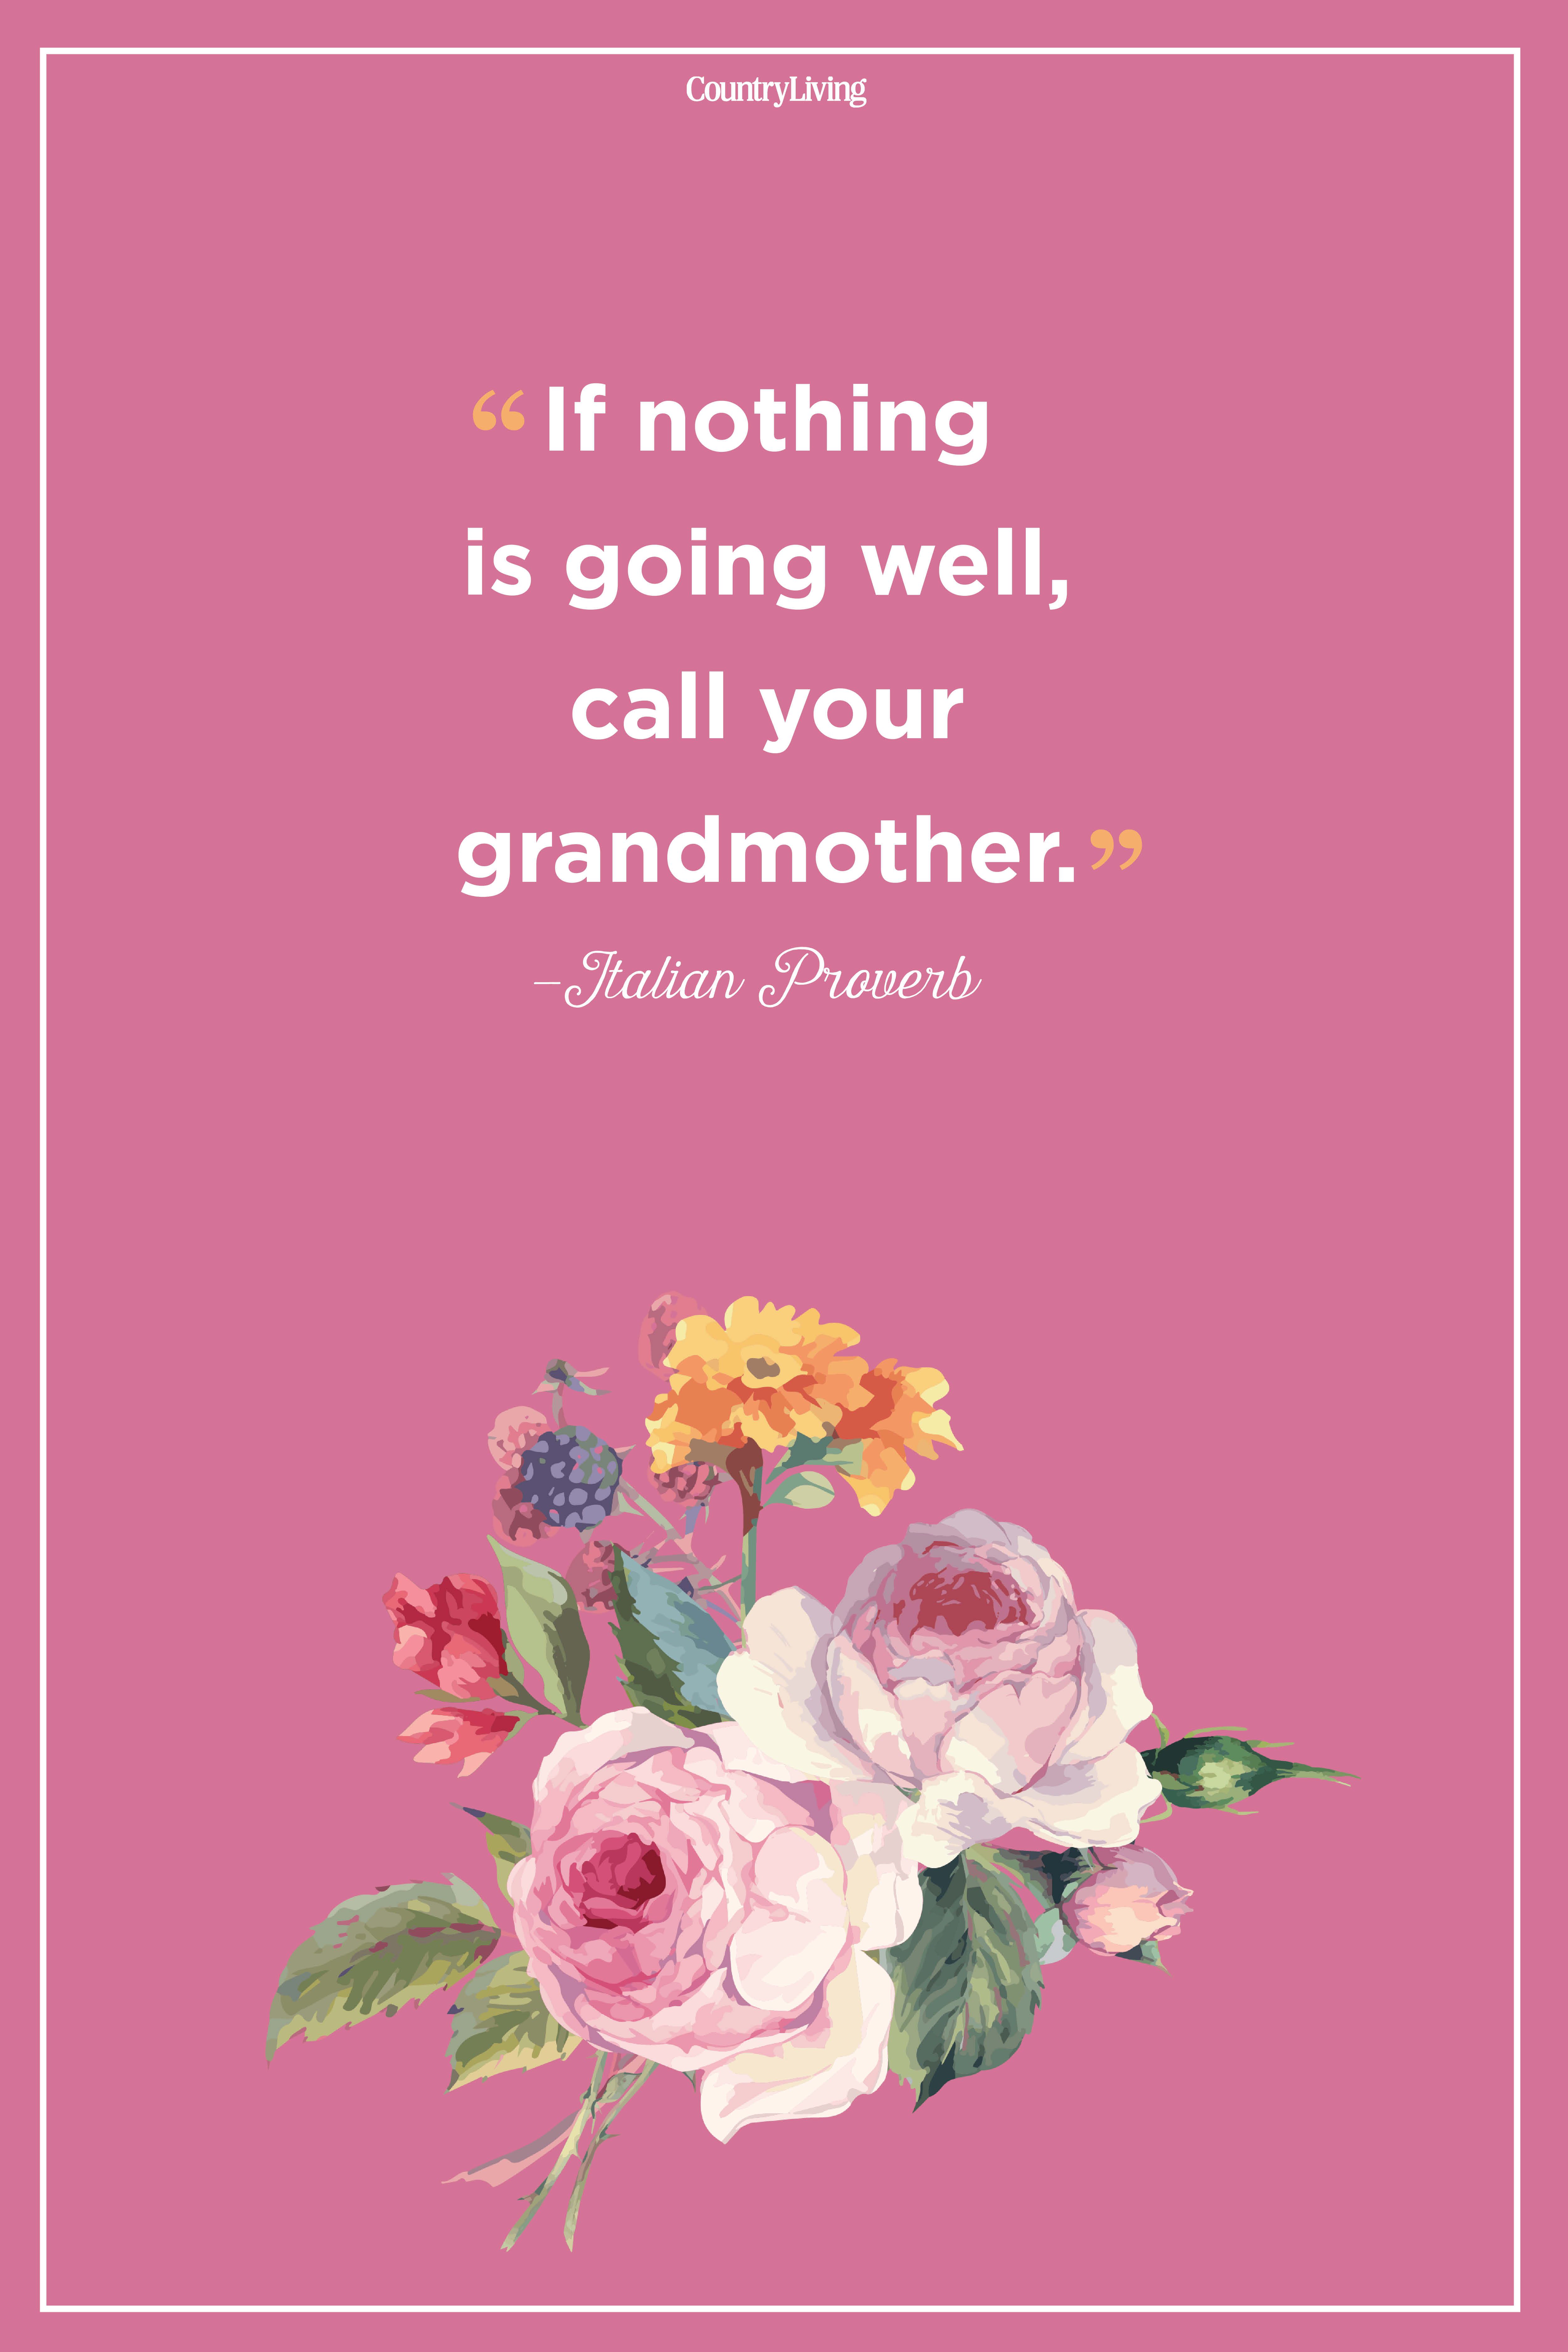 34 Grandma Love Quotes Best Grandmother Quotes And Sayings,How To Play Gin Rummy For 2